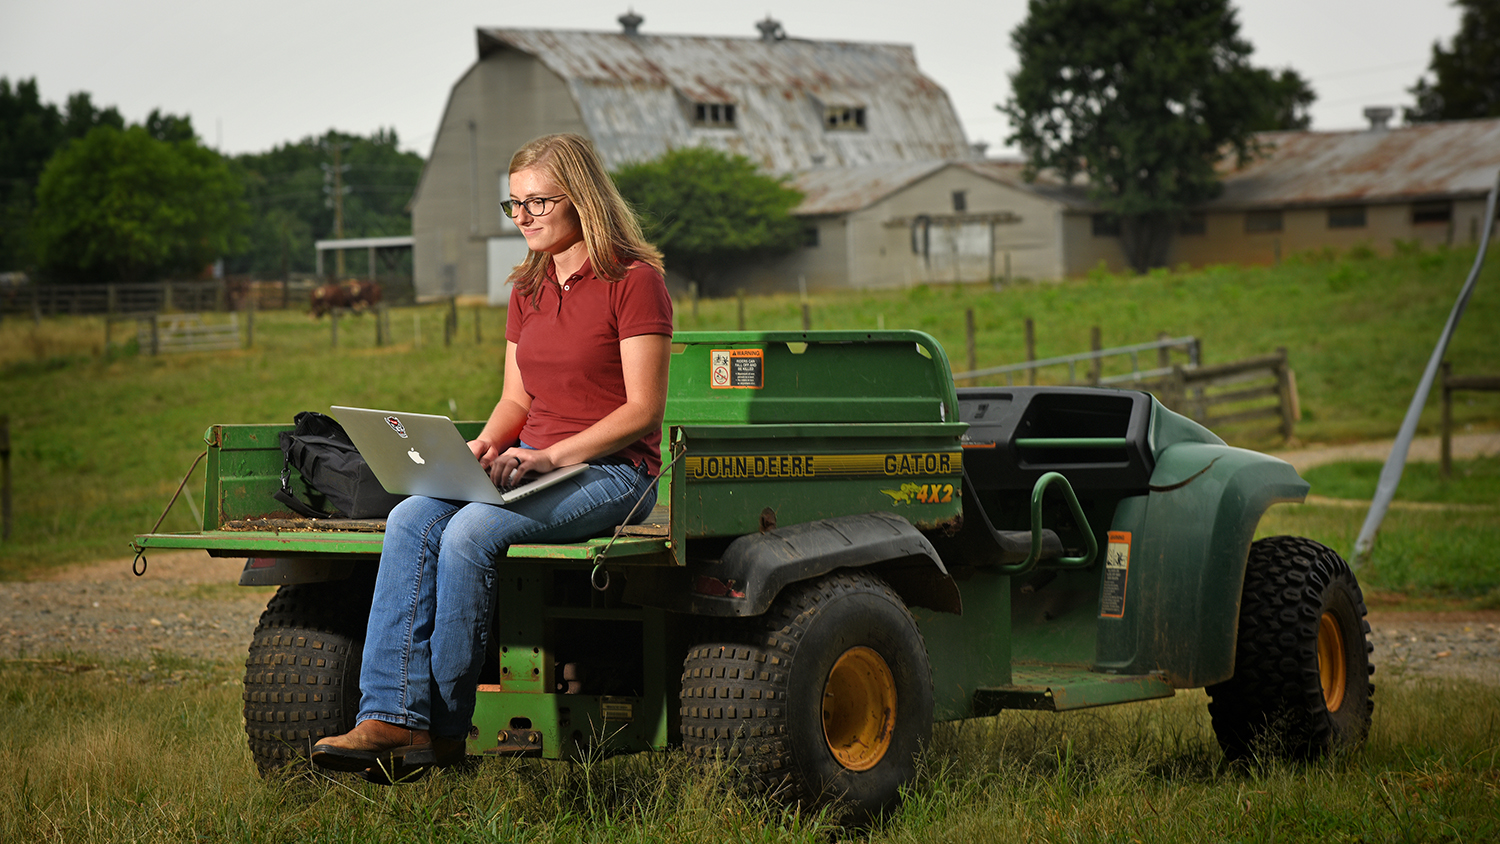 Animal Science student working on laptop sitting on a tractor.